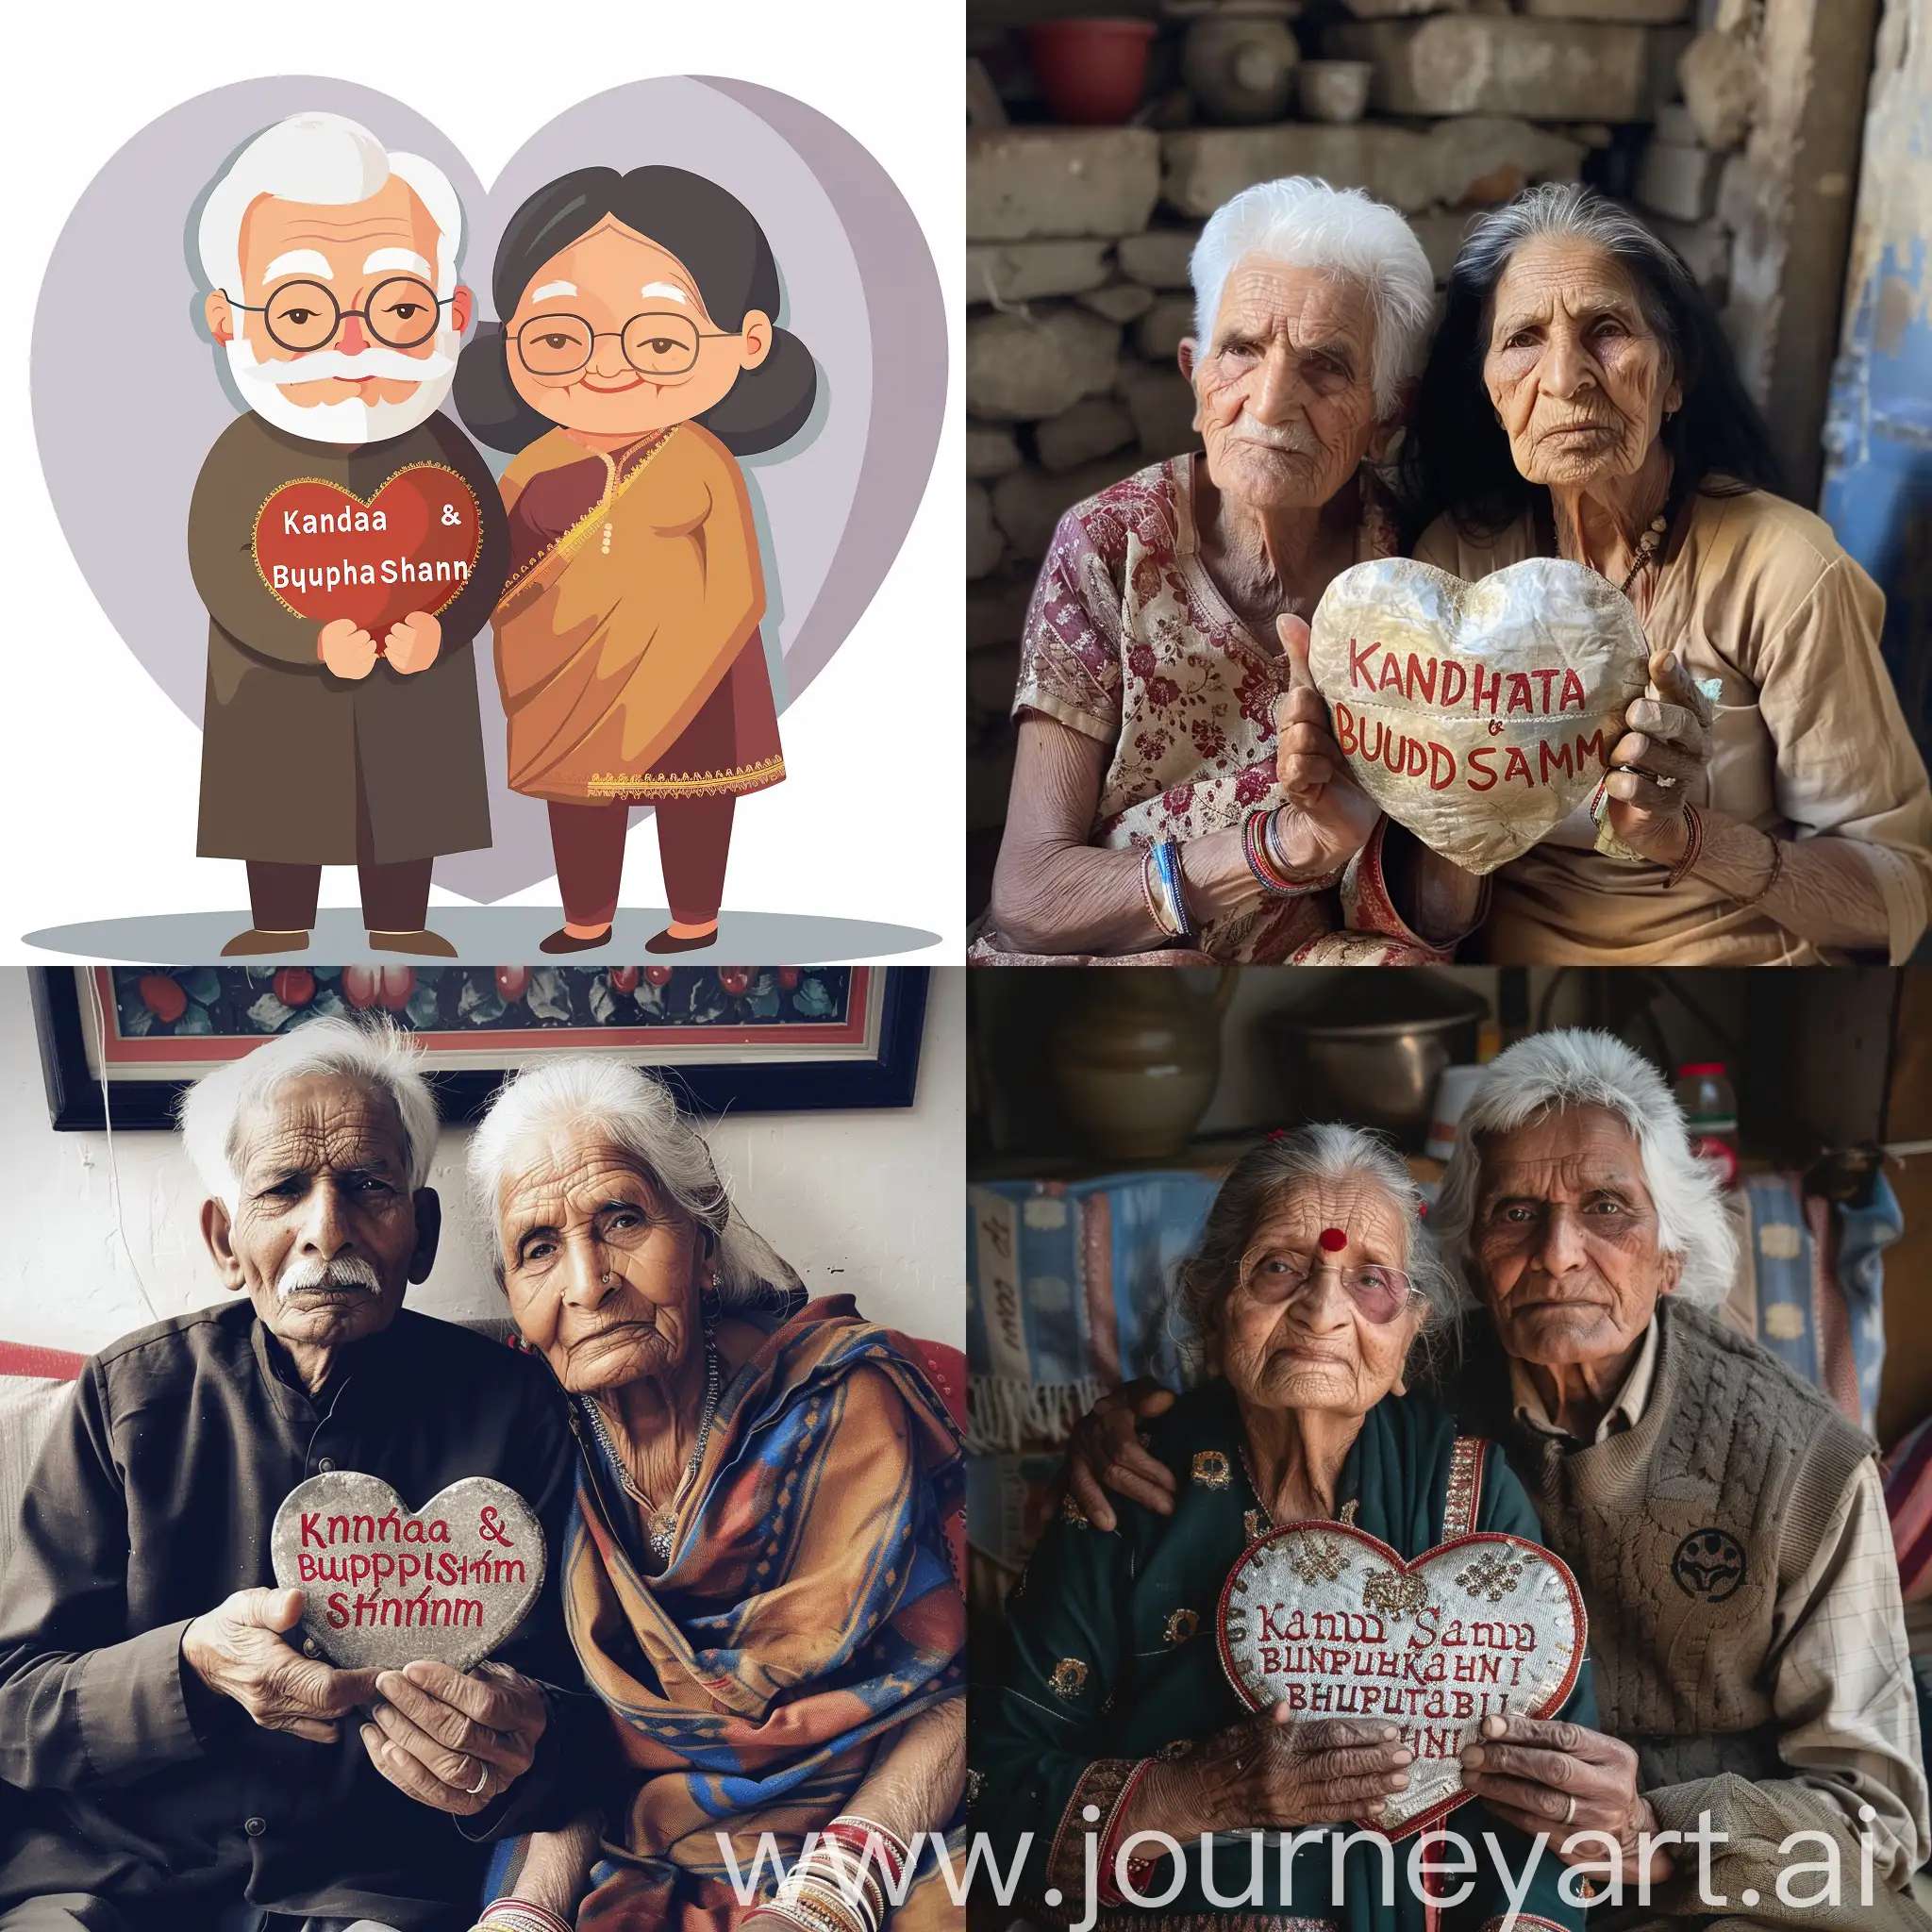 An elderly couple is holding a heart with the words Kanta Sharma and Bhupchand Sharma written on it.